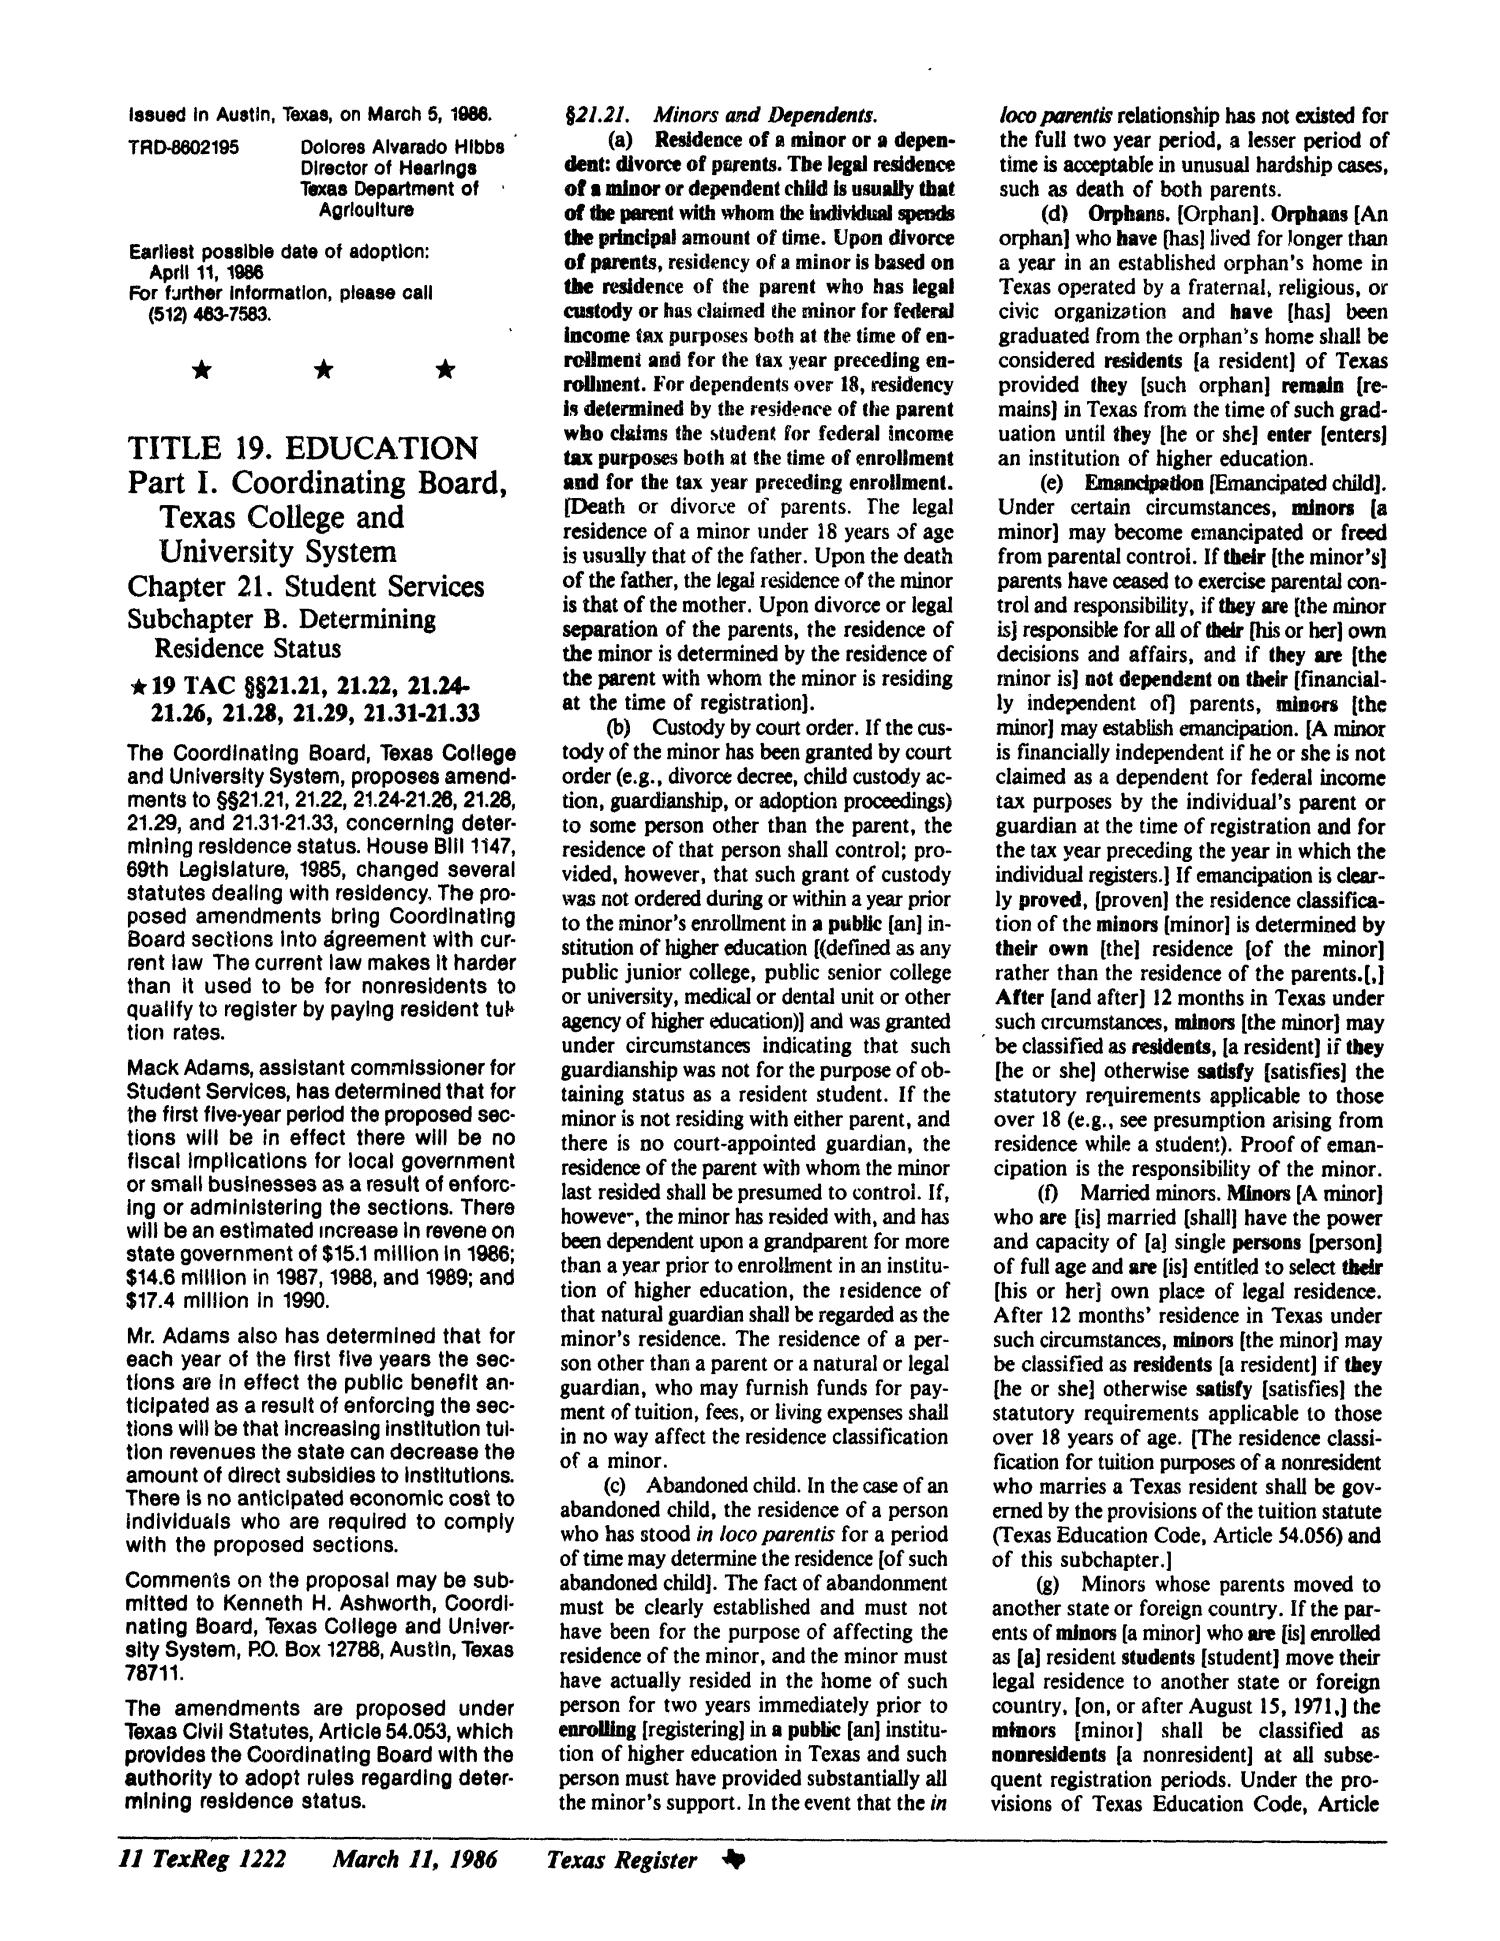 Texas Register, Volume 11, Number 19, Pages 1163-1244, March 11, 1986
                                                
                                                    1222
                                                